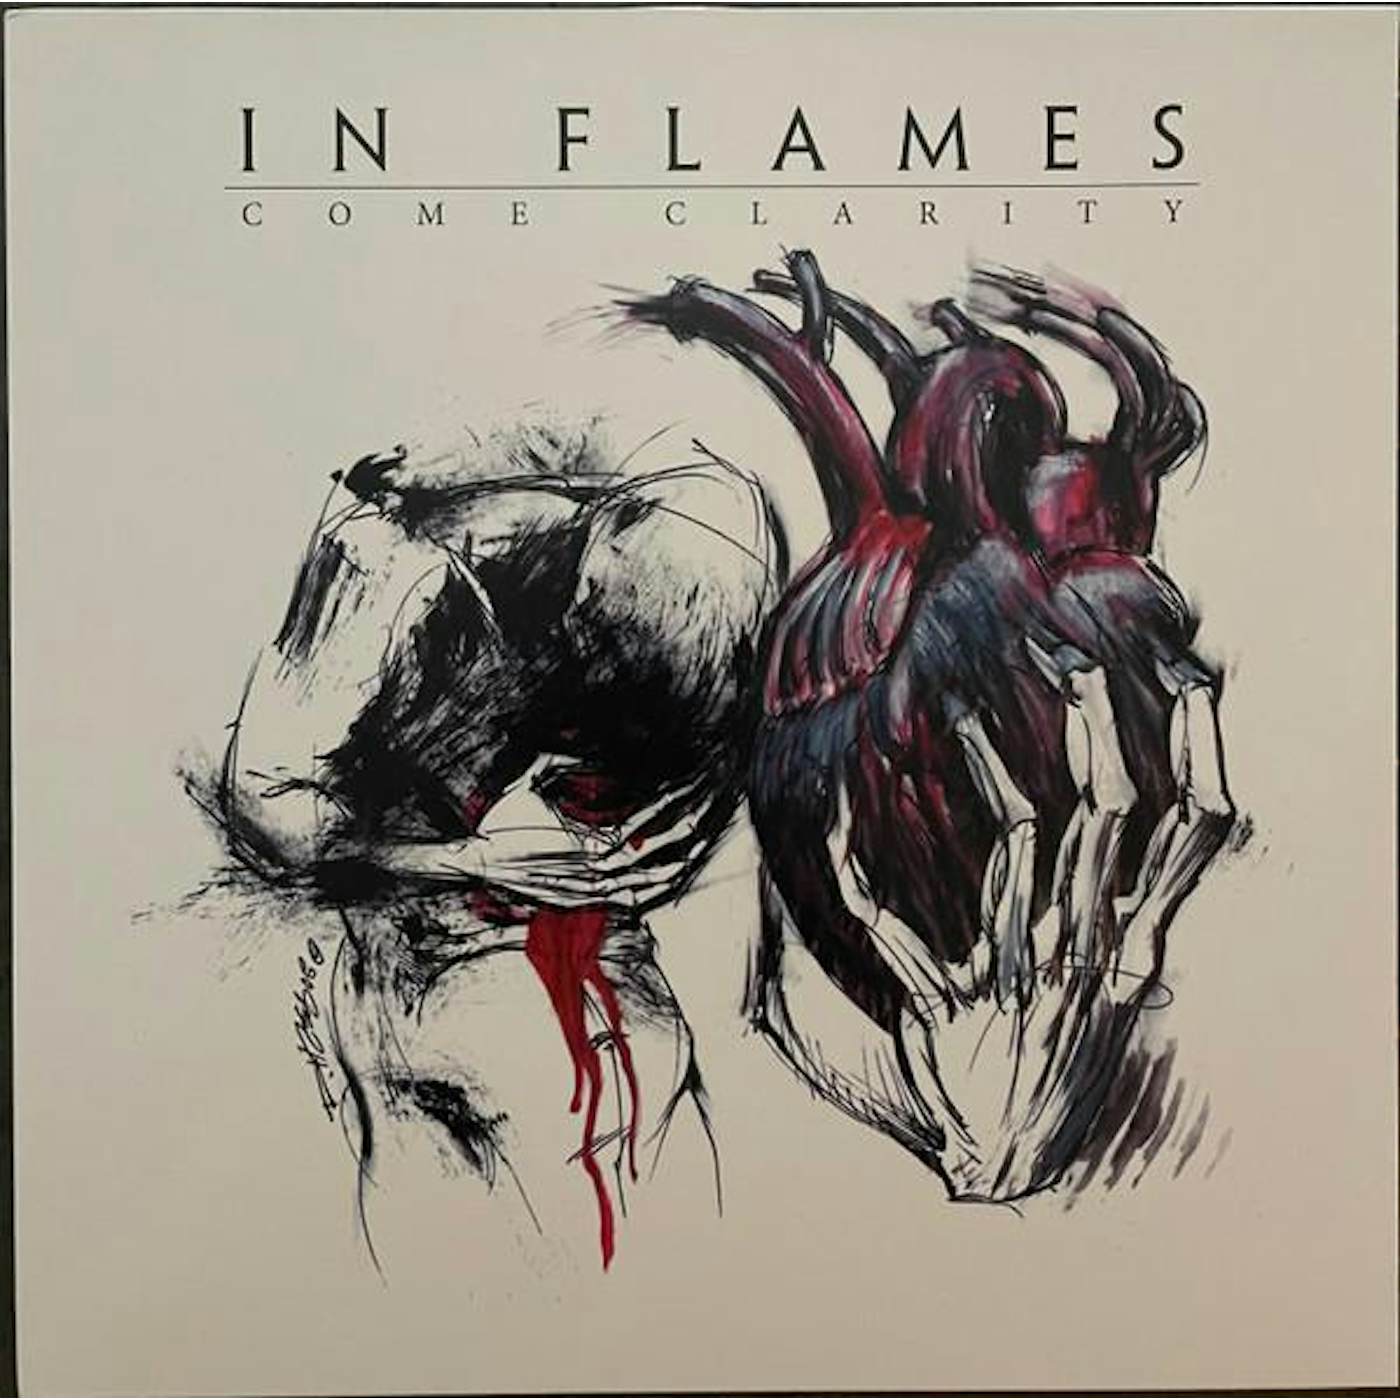 In Flames COME CLARITY Vinyl Record